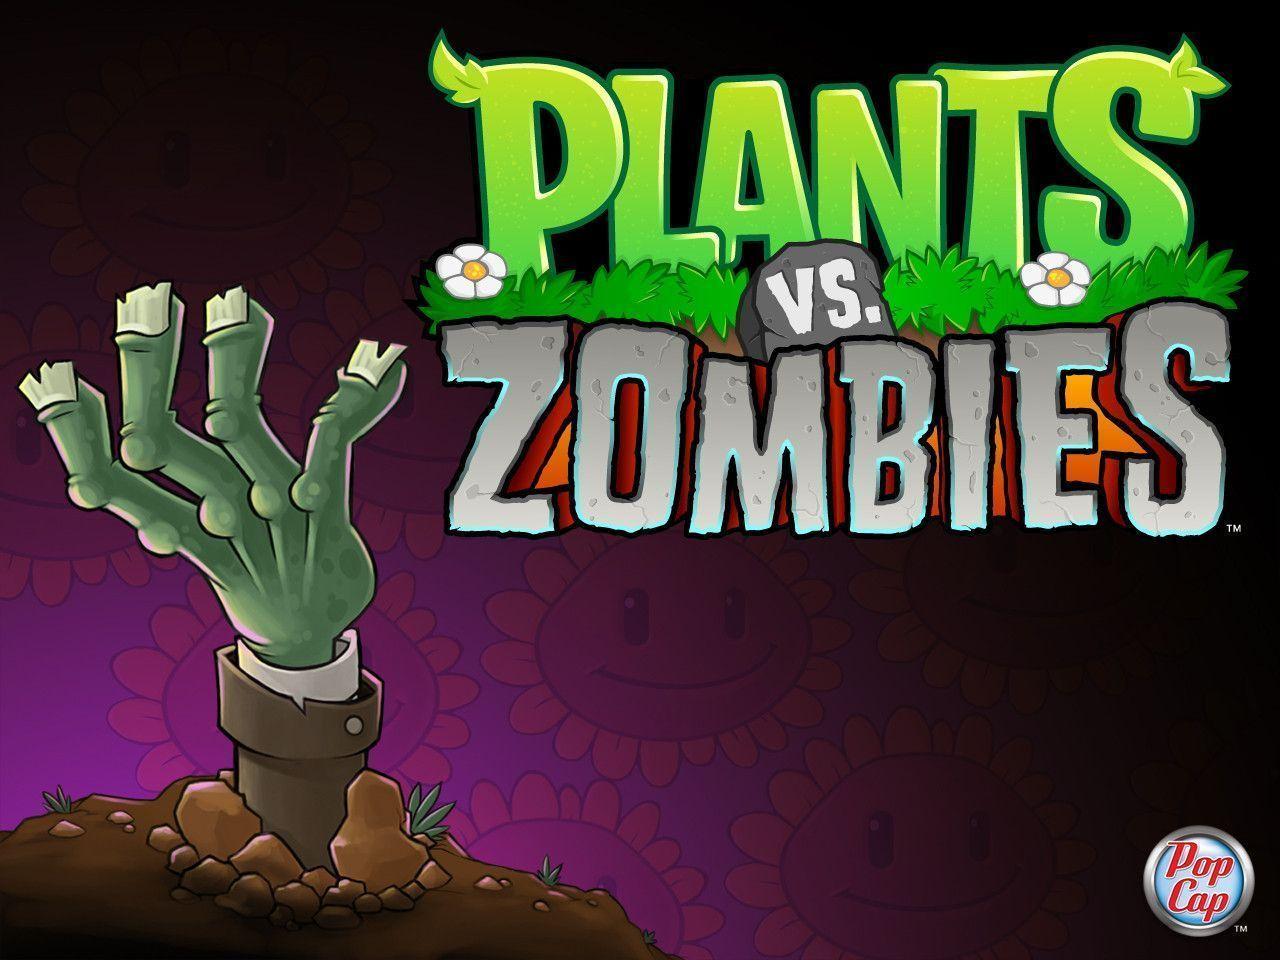 PopCap Games. Plants vs. Zombies, Music and More